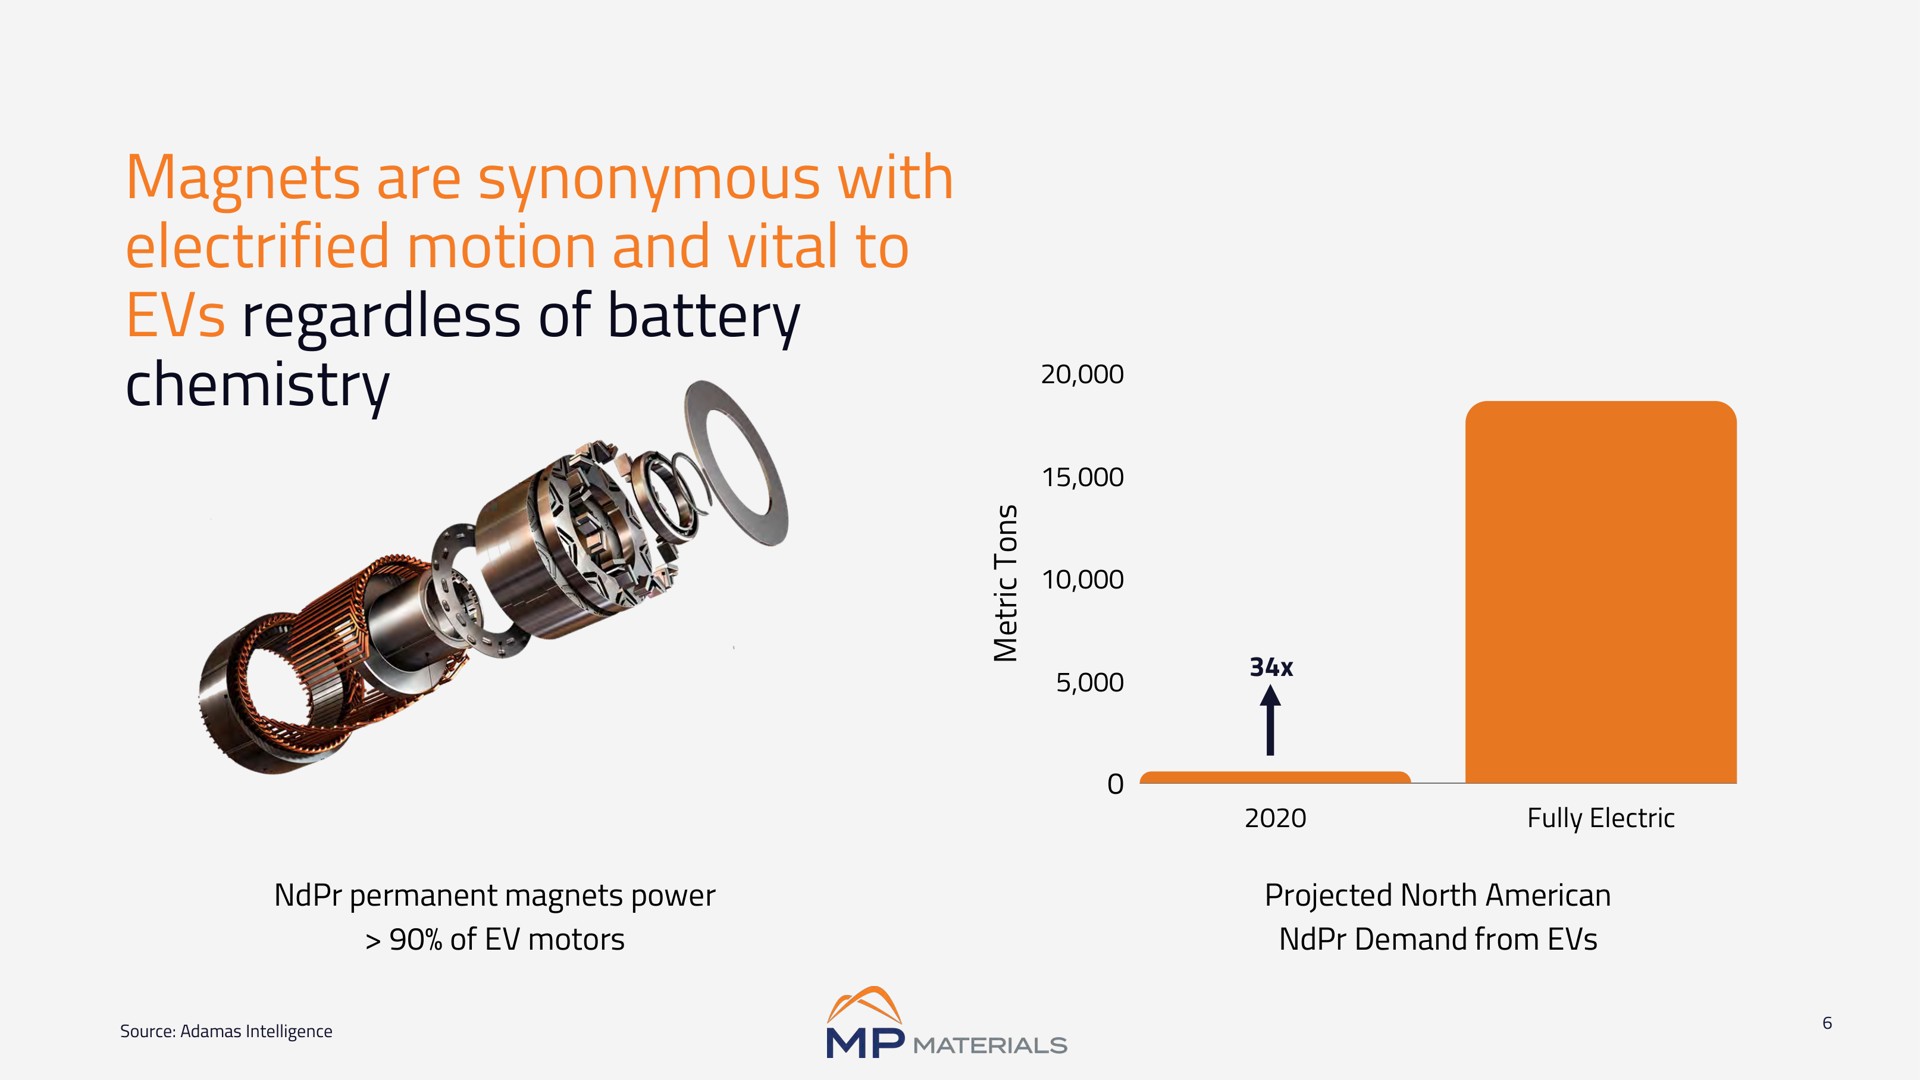 magnets are synonymous with electrified motion and vital to regardless of battery chemistry on | MP Materials